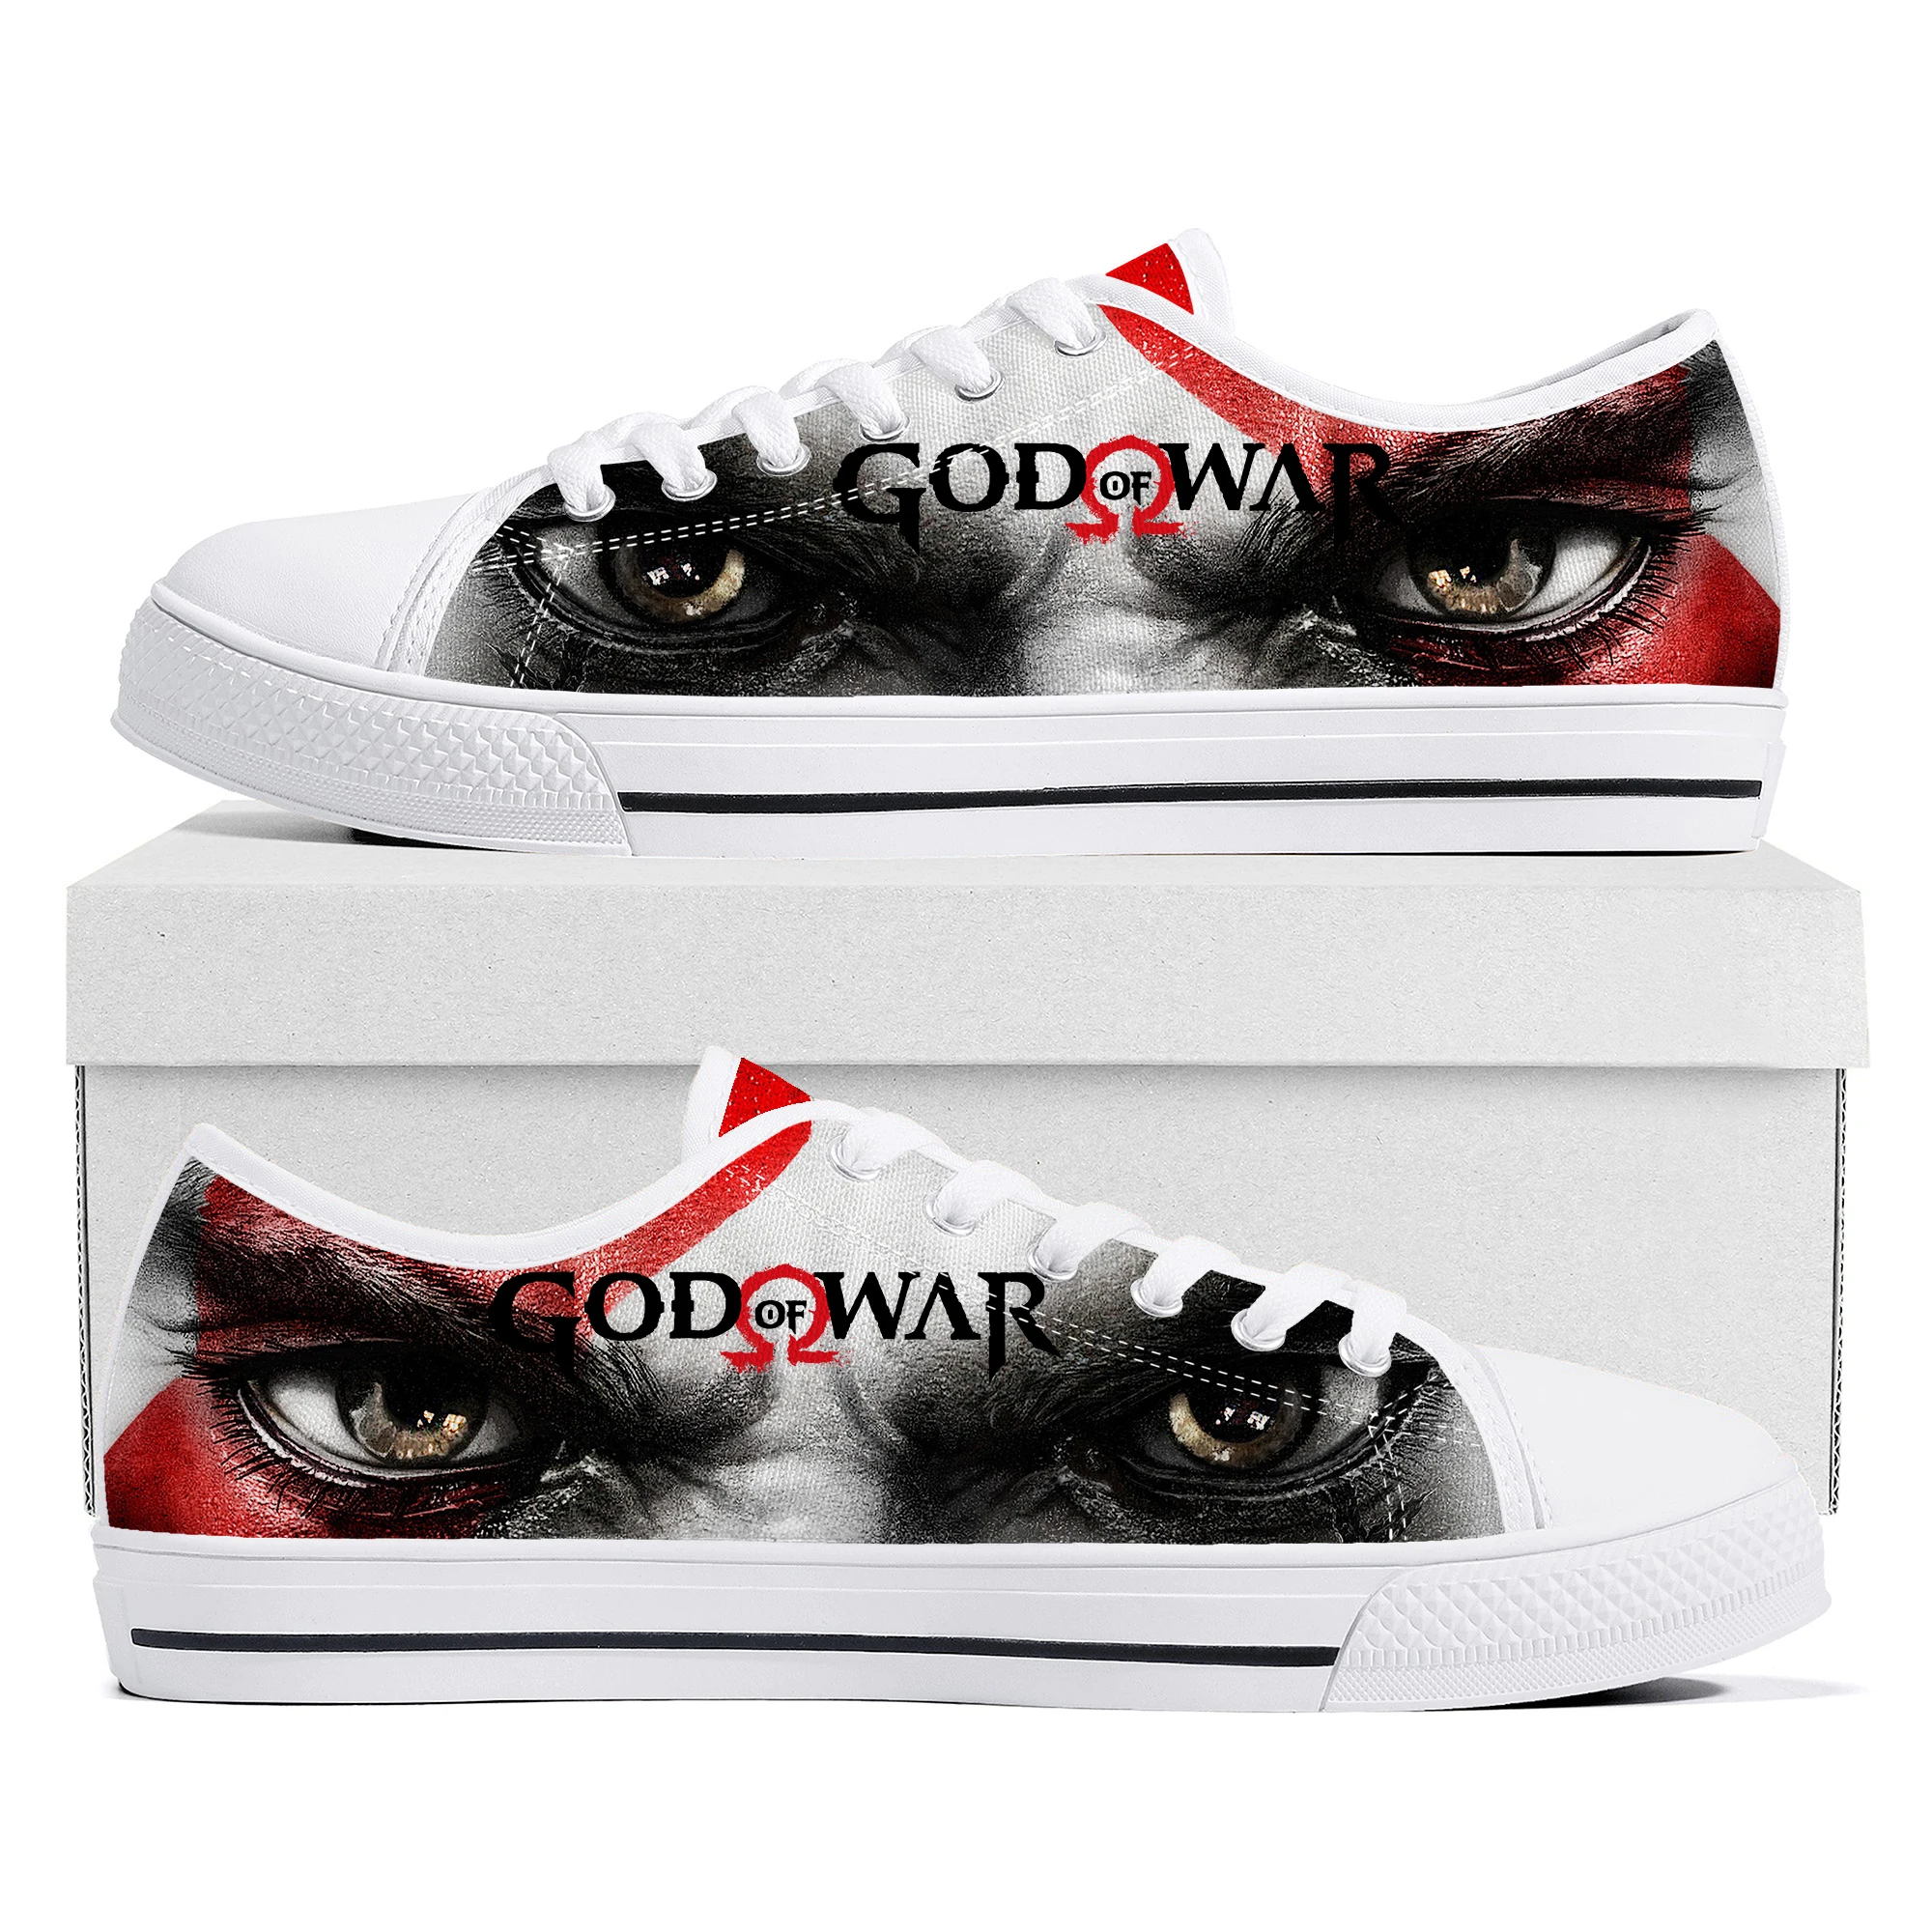 

God of War Low Top Sneakers Hot Cartoon Game Womens Mens Teenager High Quality Fashion Canvas Sneaker Couple Custom Built Shoes